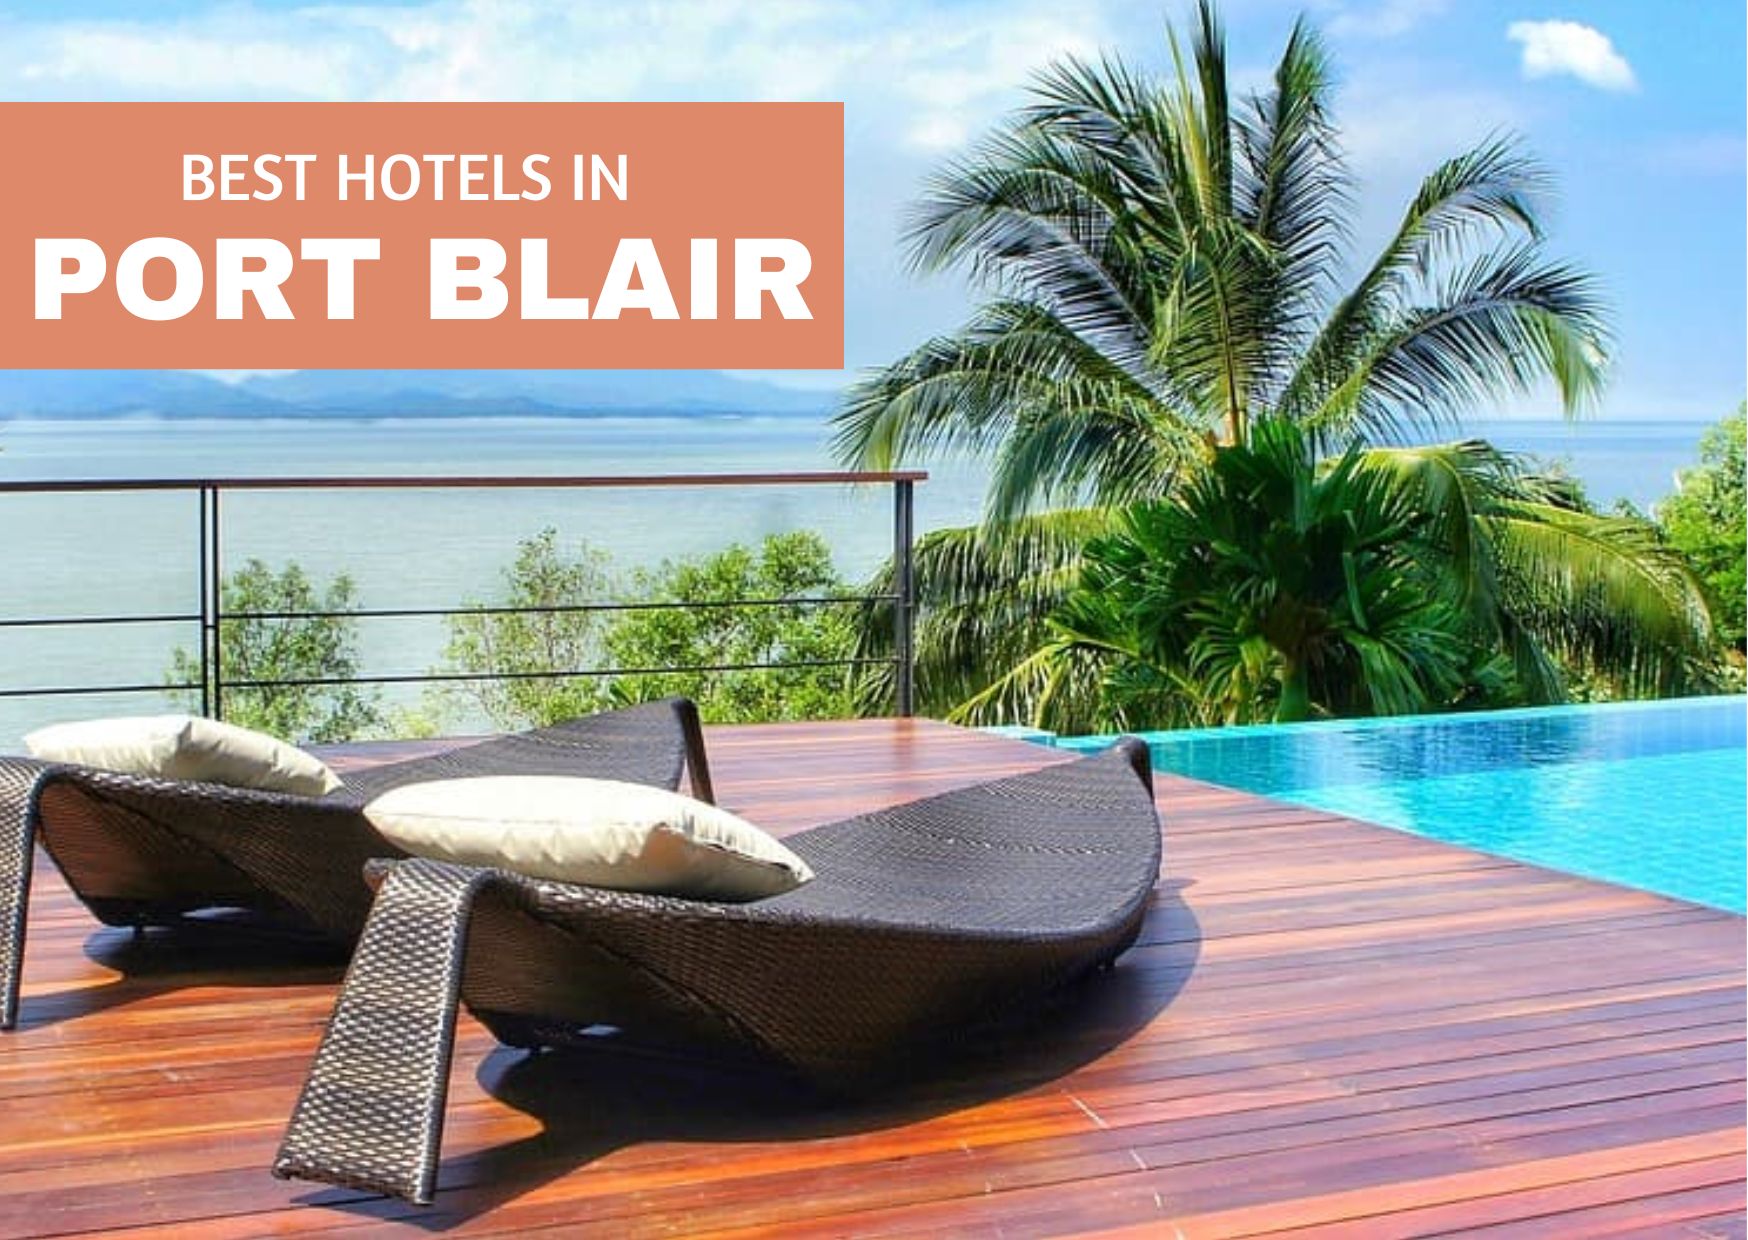 Best Hotels In Port Blair For Luxury Stay- NC Travel Andaman